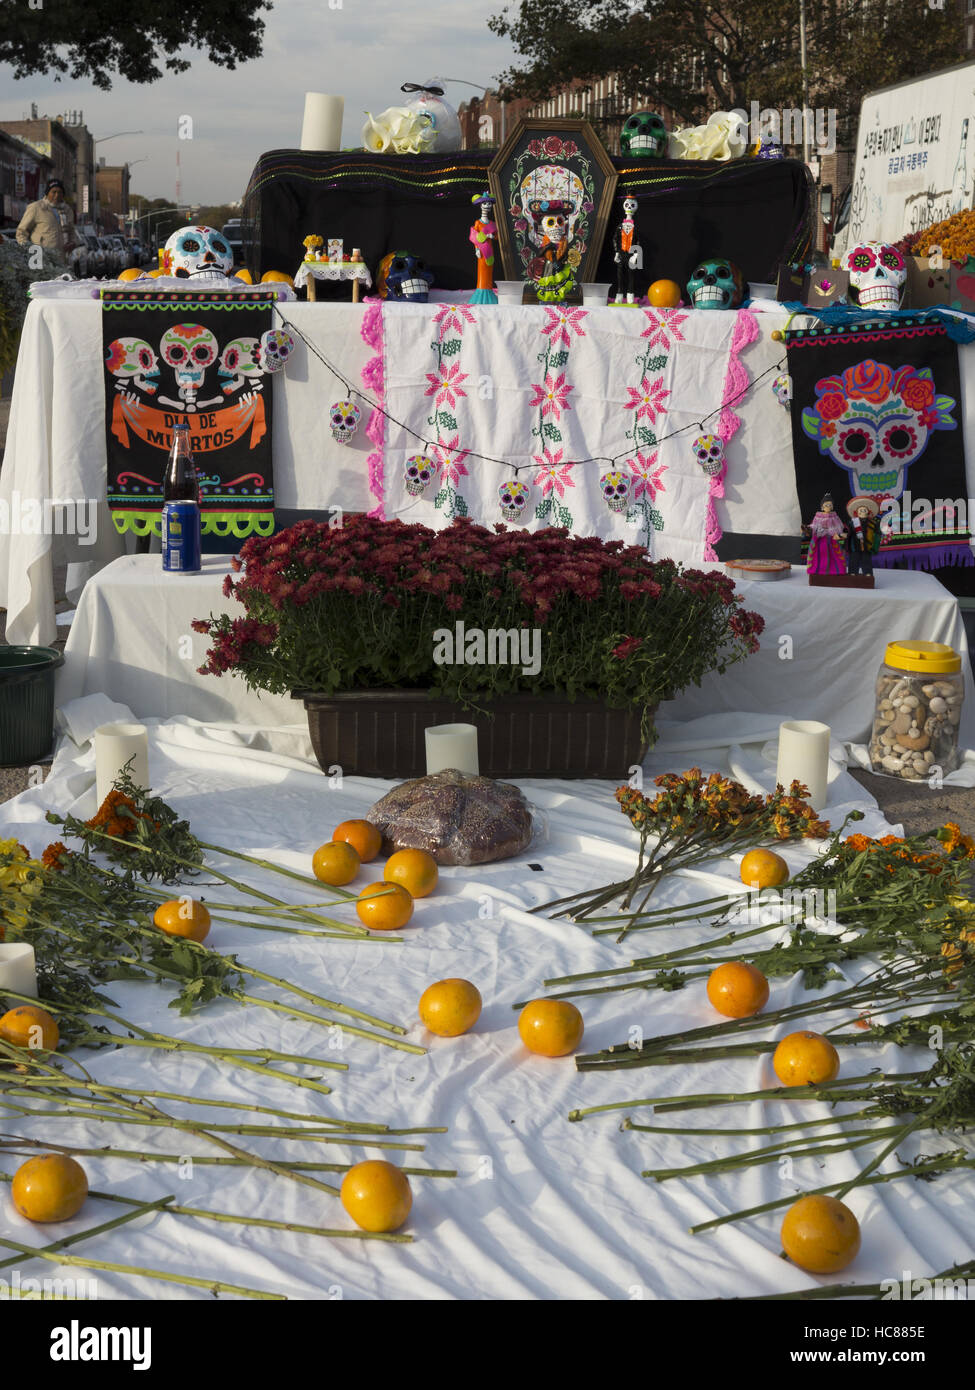 First Annual Day of the Dead Celebration in the Kensington section of Brooklyn, New York on October 30, 2016. Stock Photo